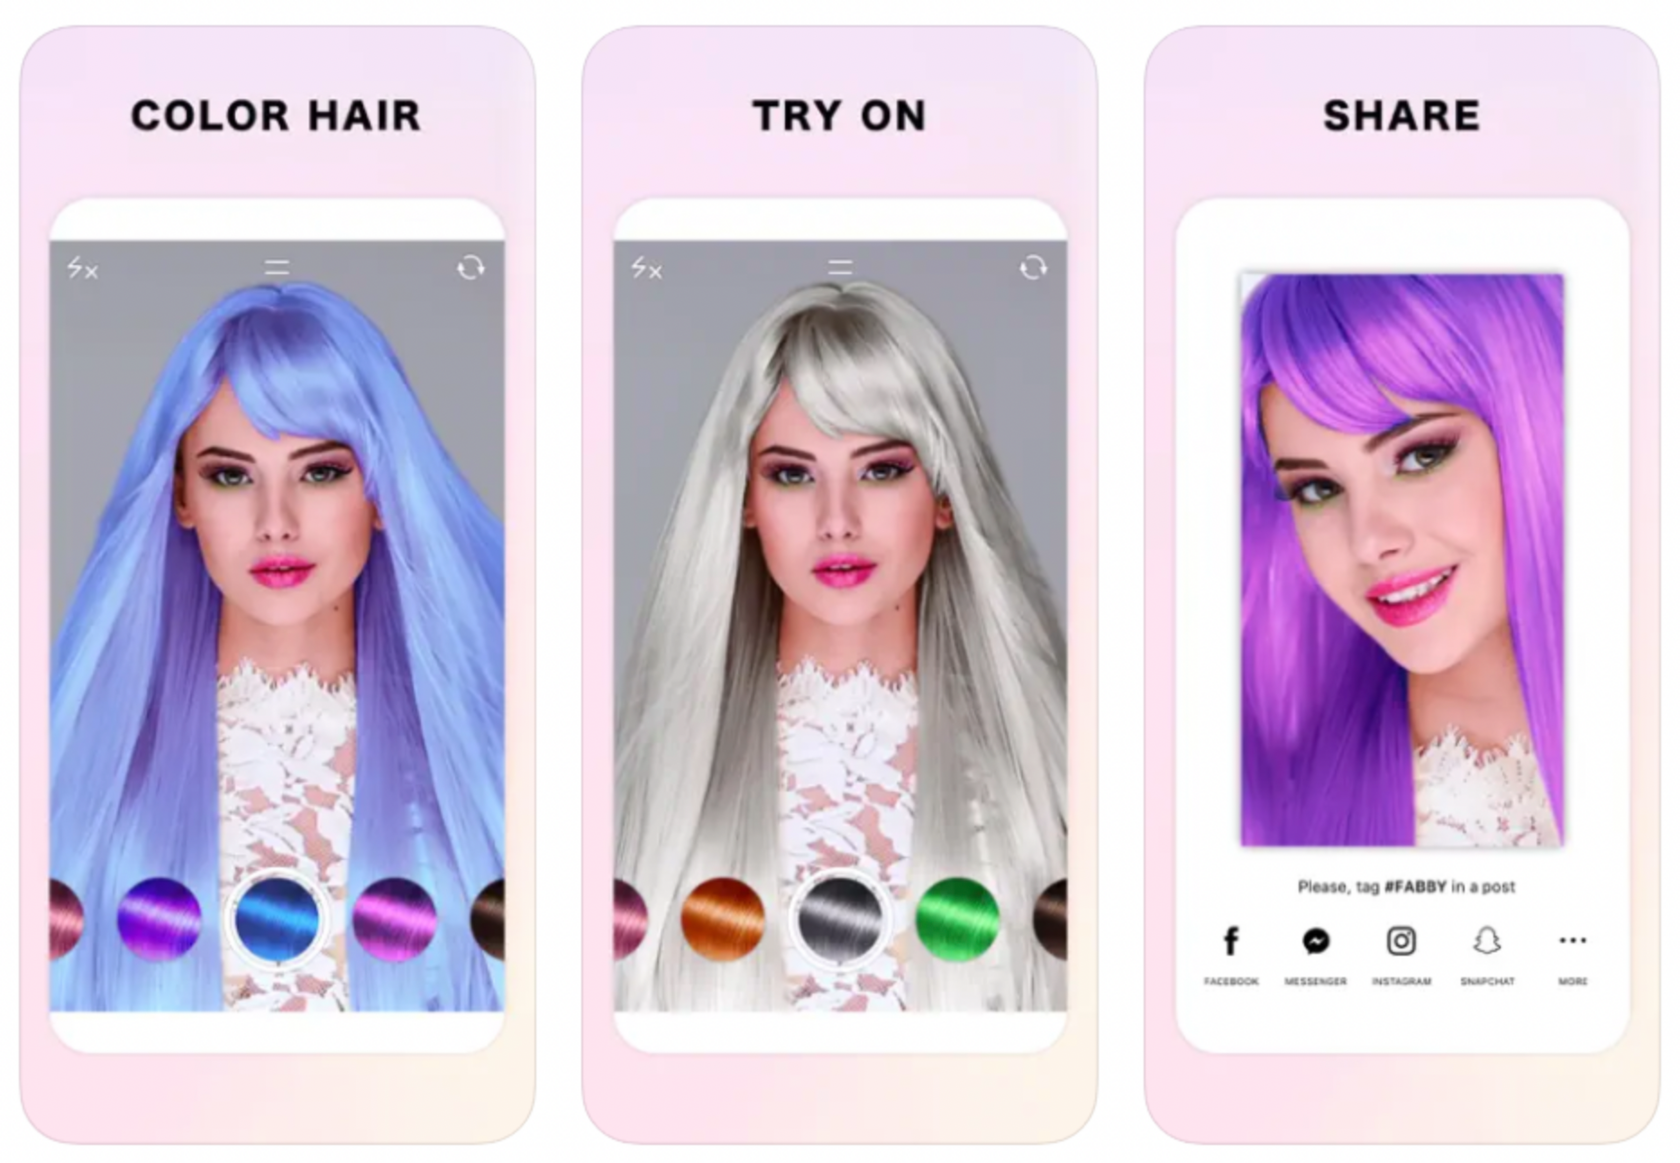 How to Try On Hair Color Filters With the Best Free Hair Color App